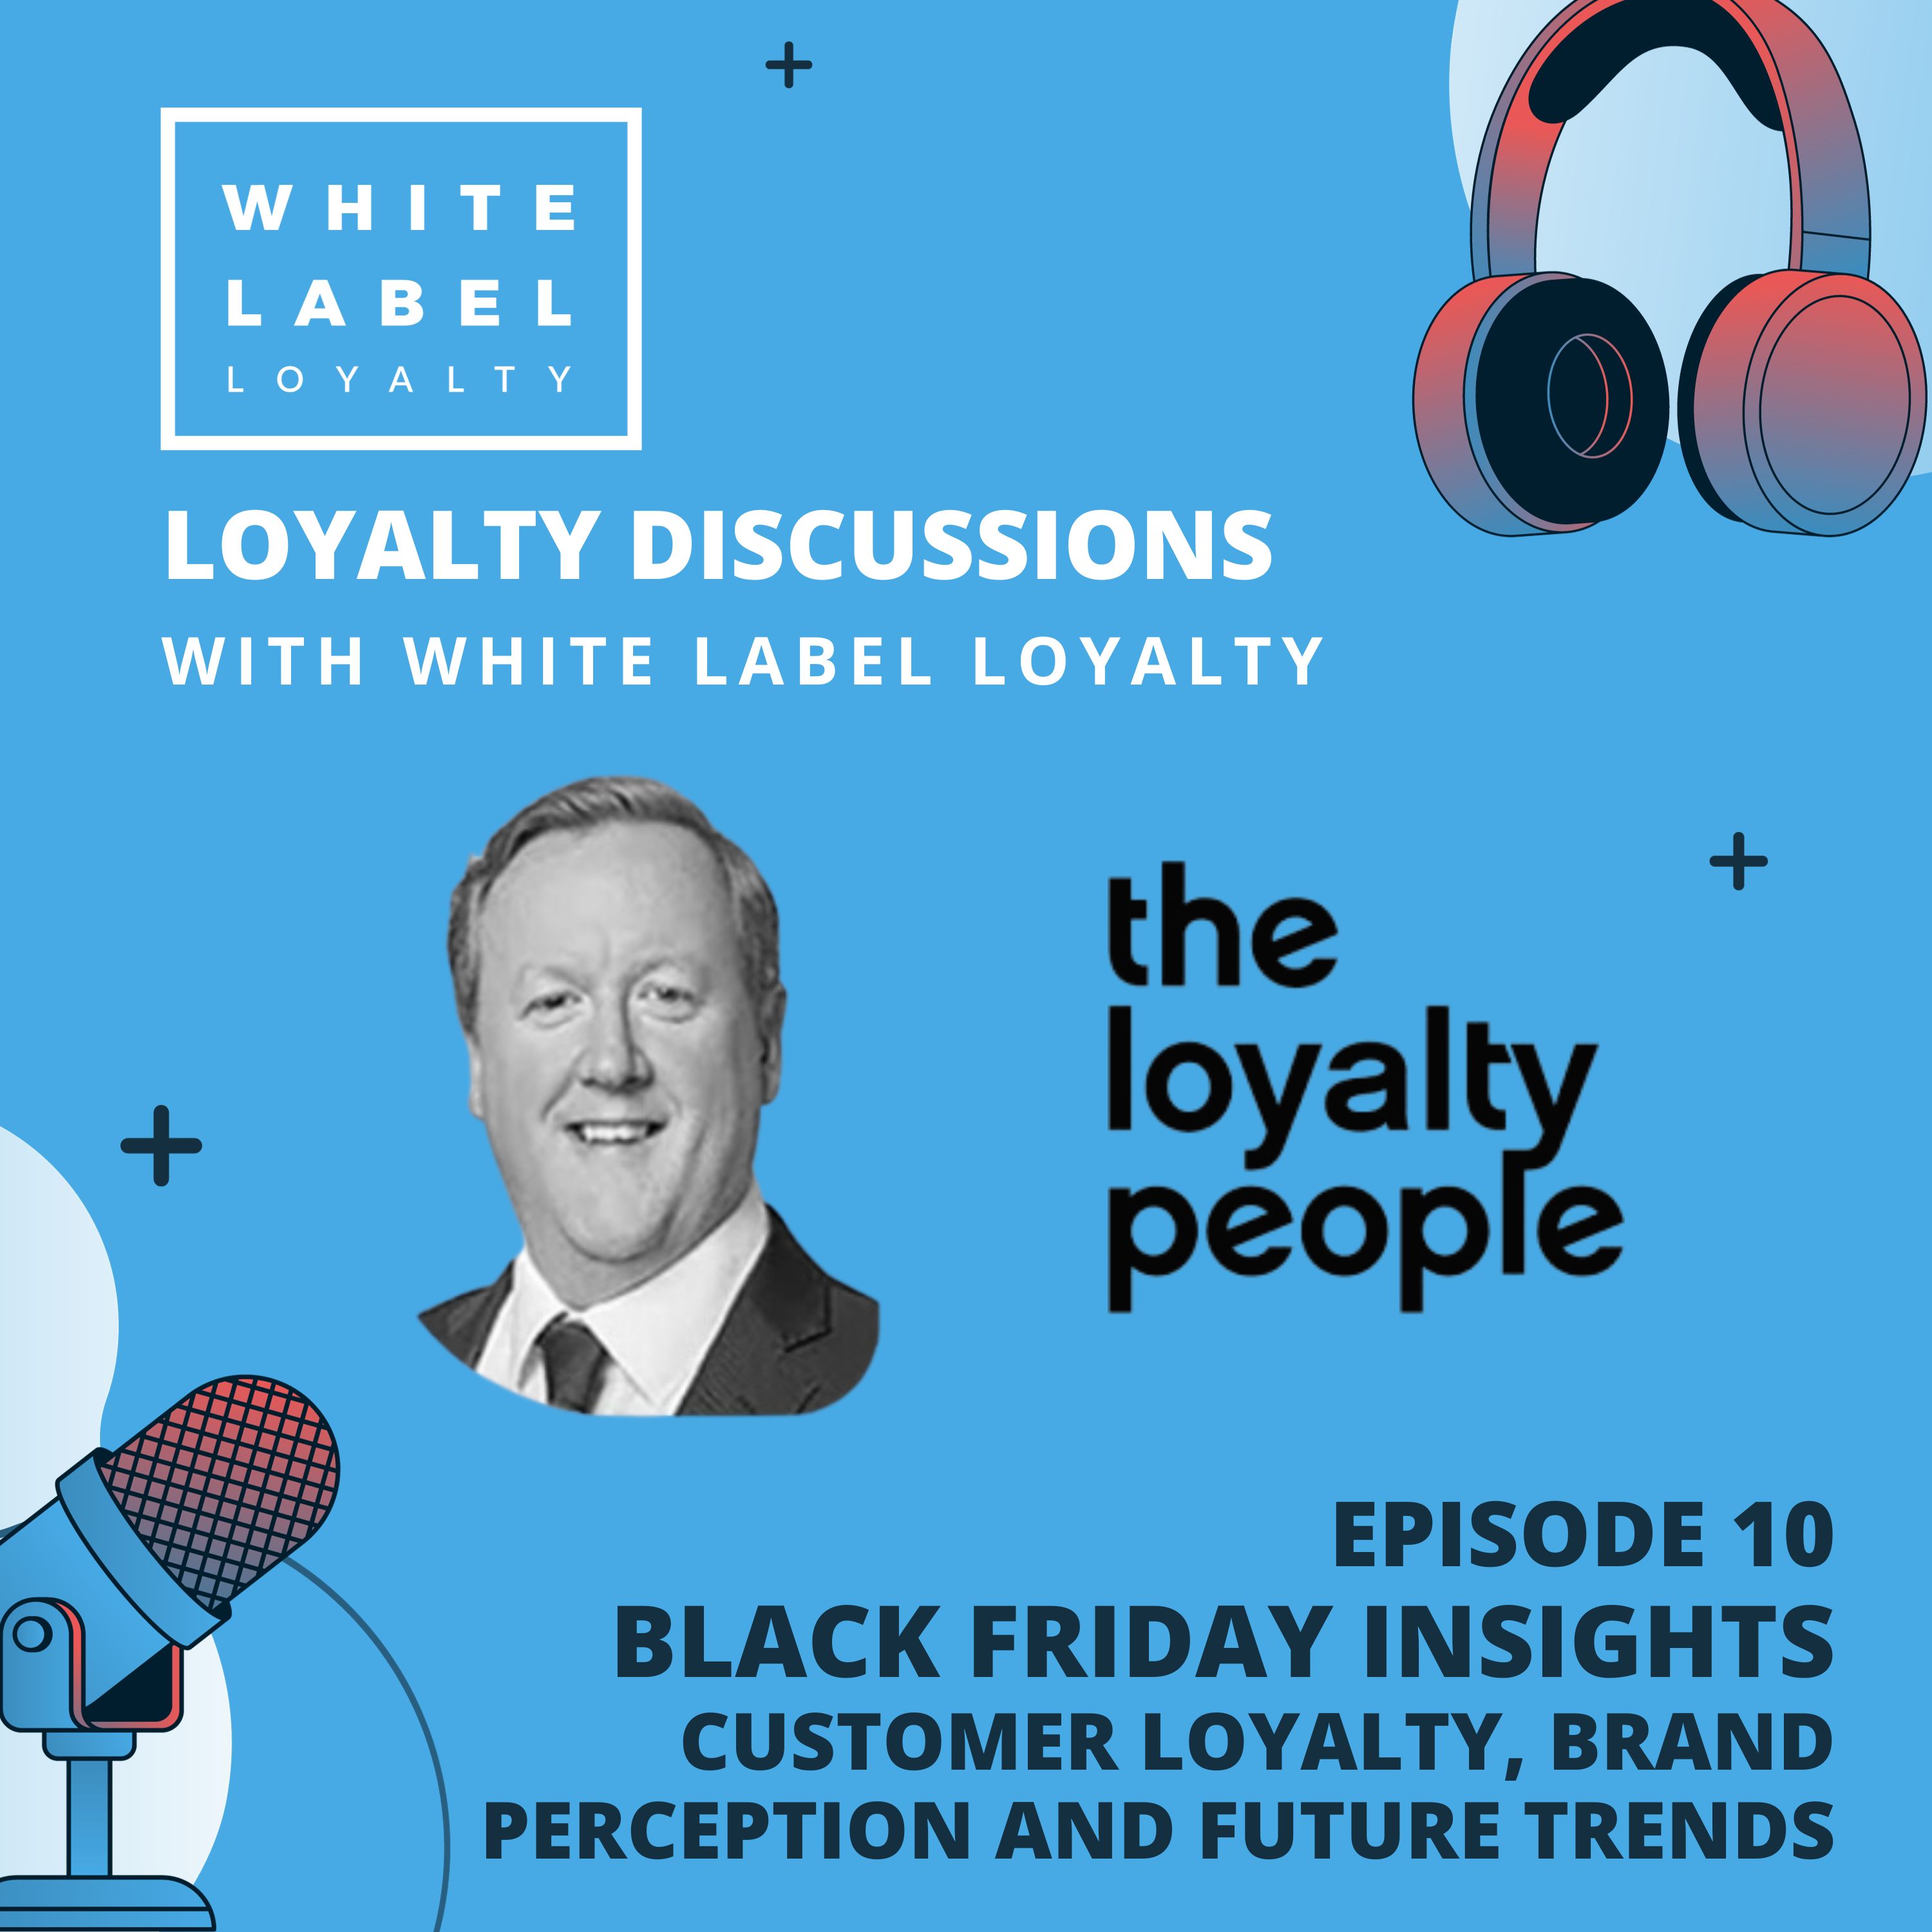 Black Friday Insights: Customer Loyalty, Brand Perception and Future Trends